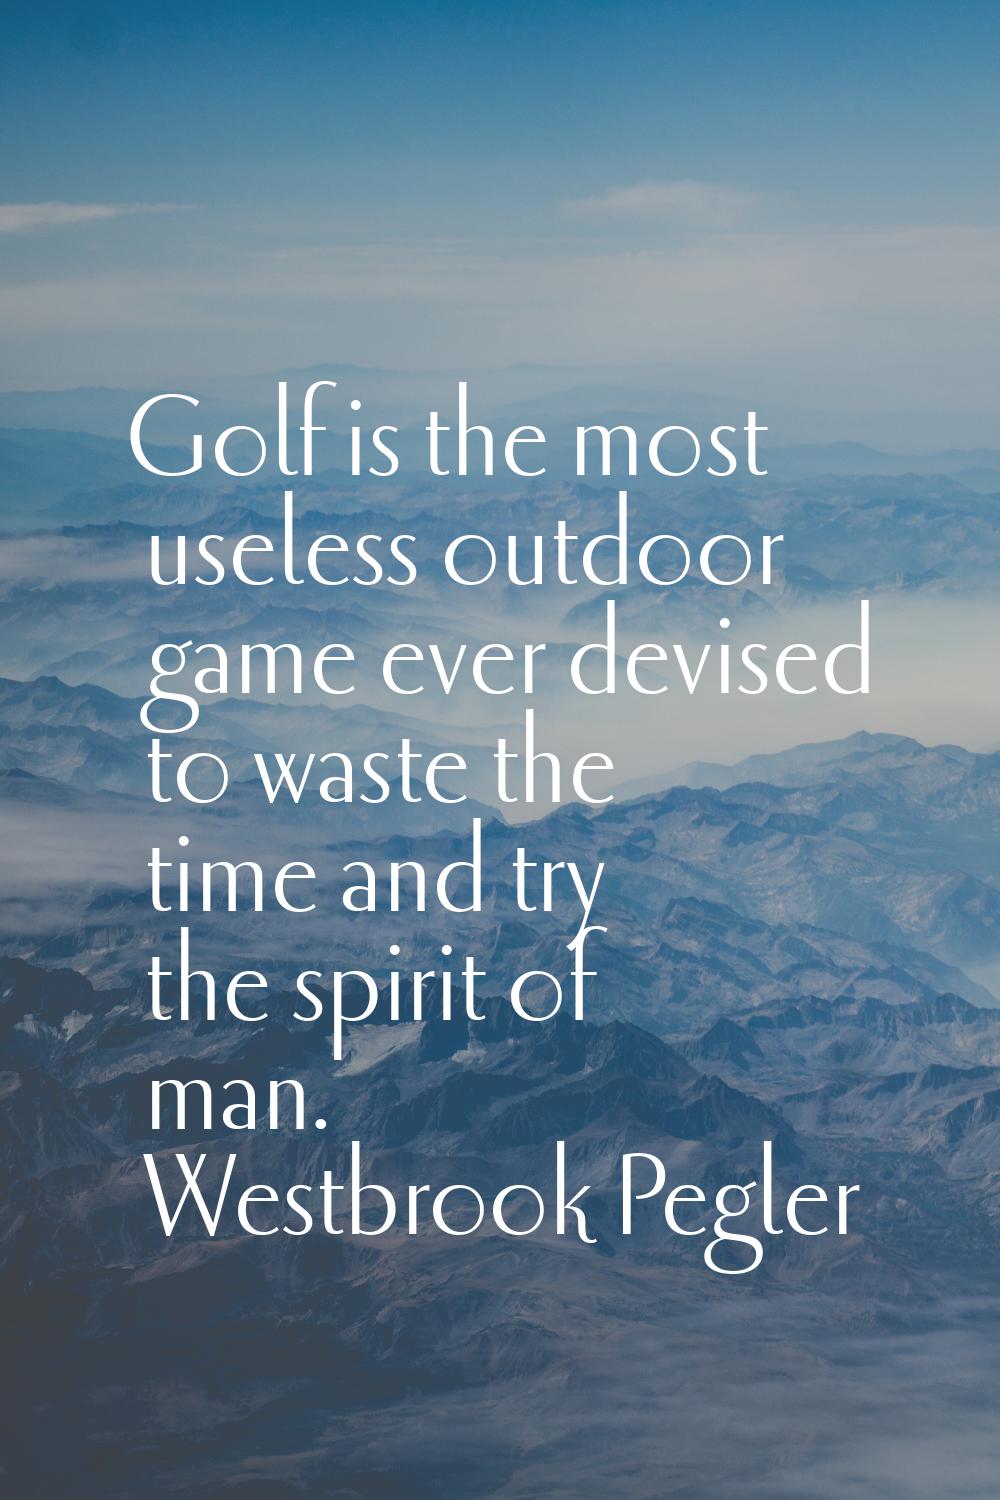 Golf is the most useless outdoor game ever devised to waste the time and try the spirit of man.